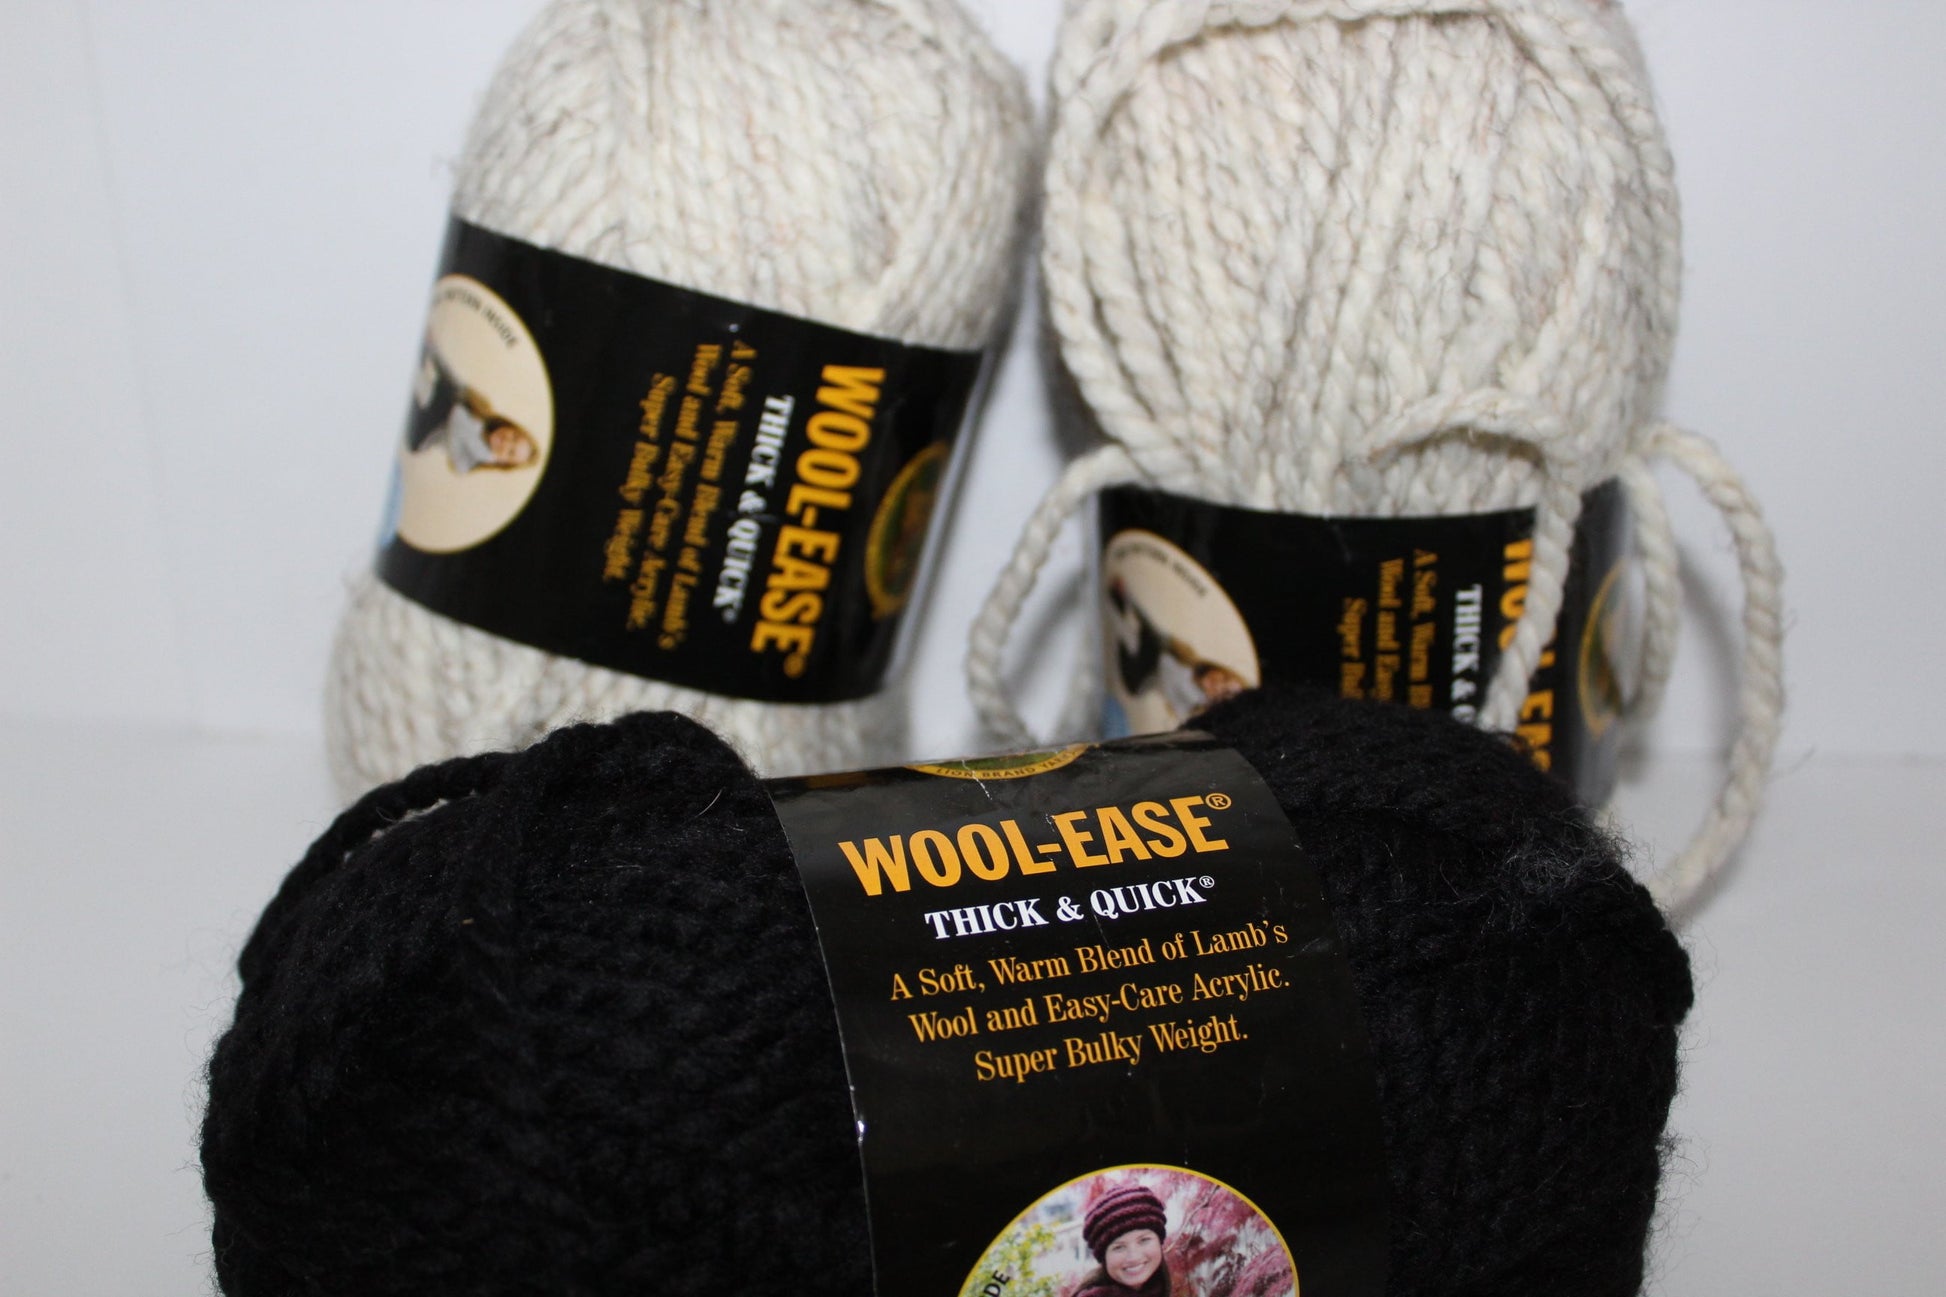 Wool-Ease Thick & Quick Wool Yarn Four Skeins Black & Wheat - 6